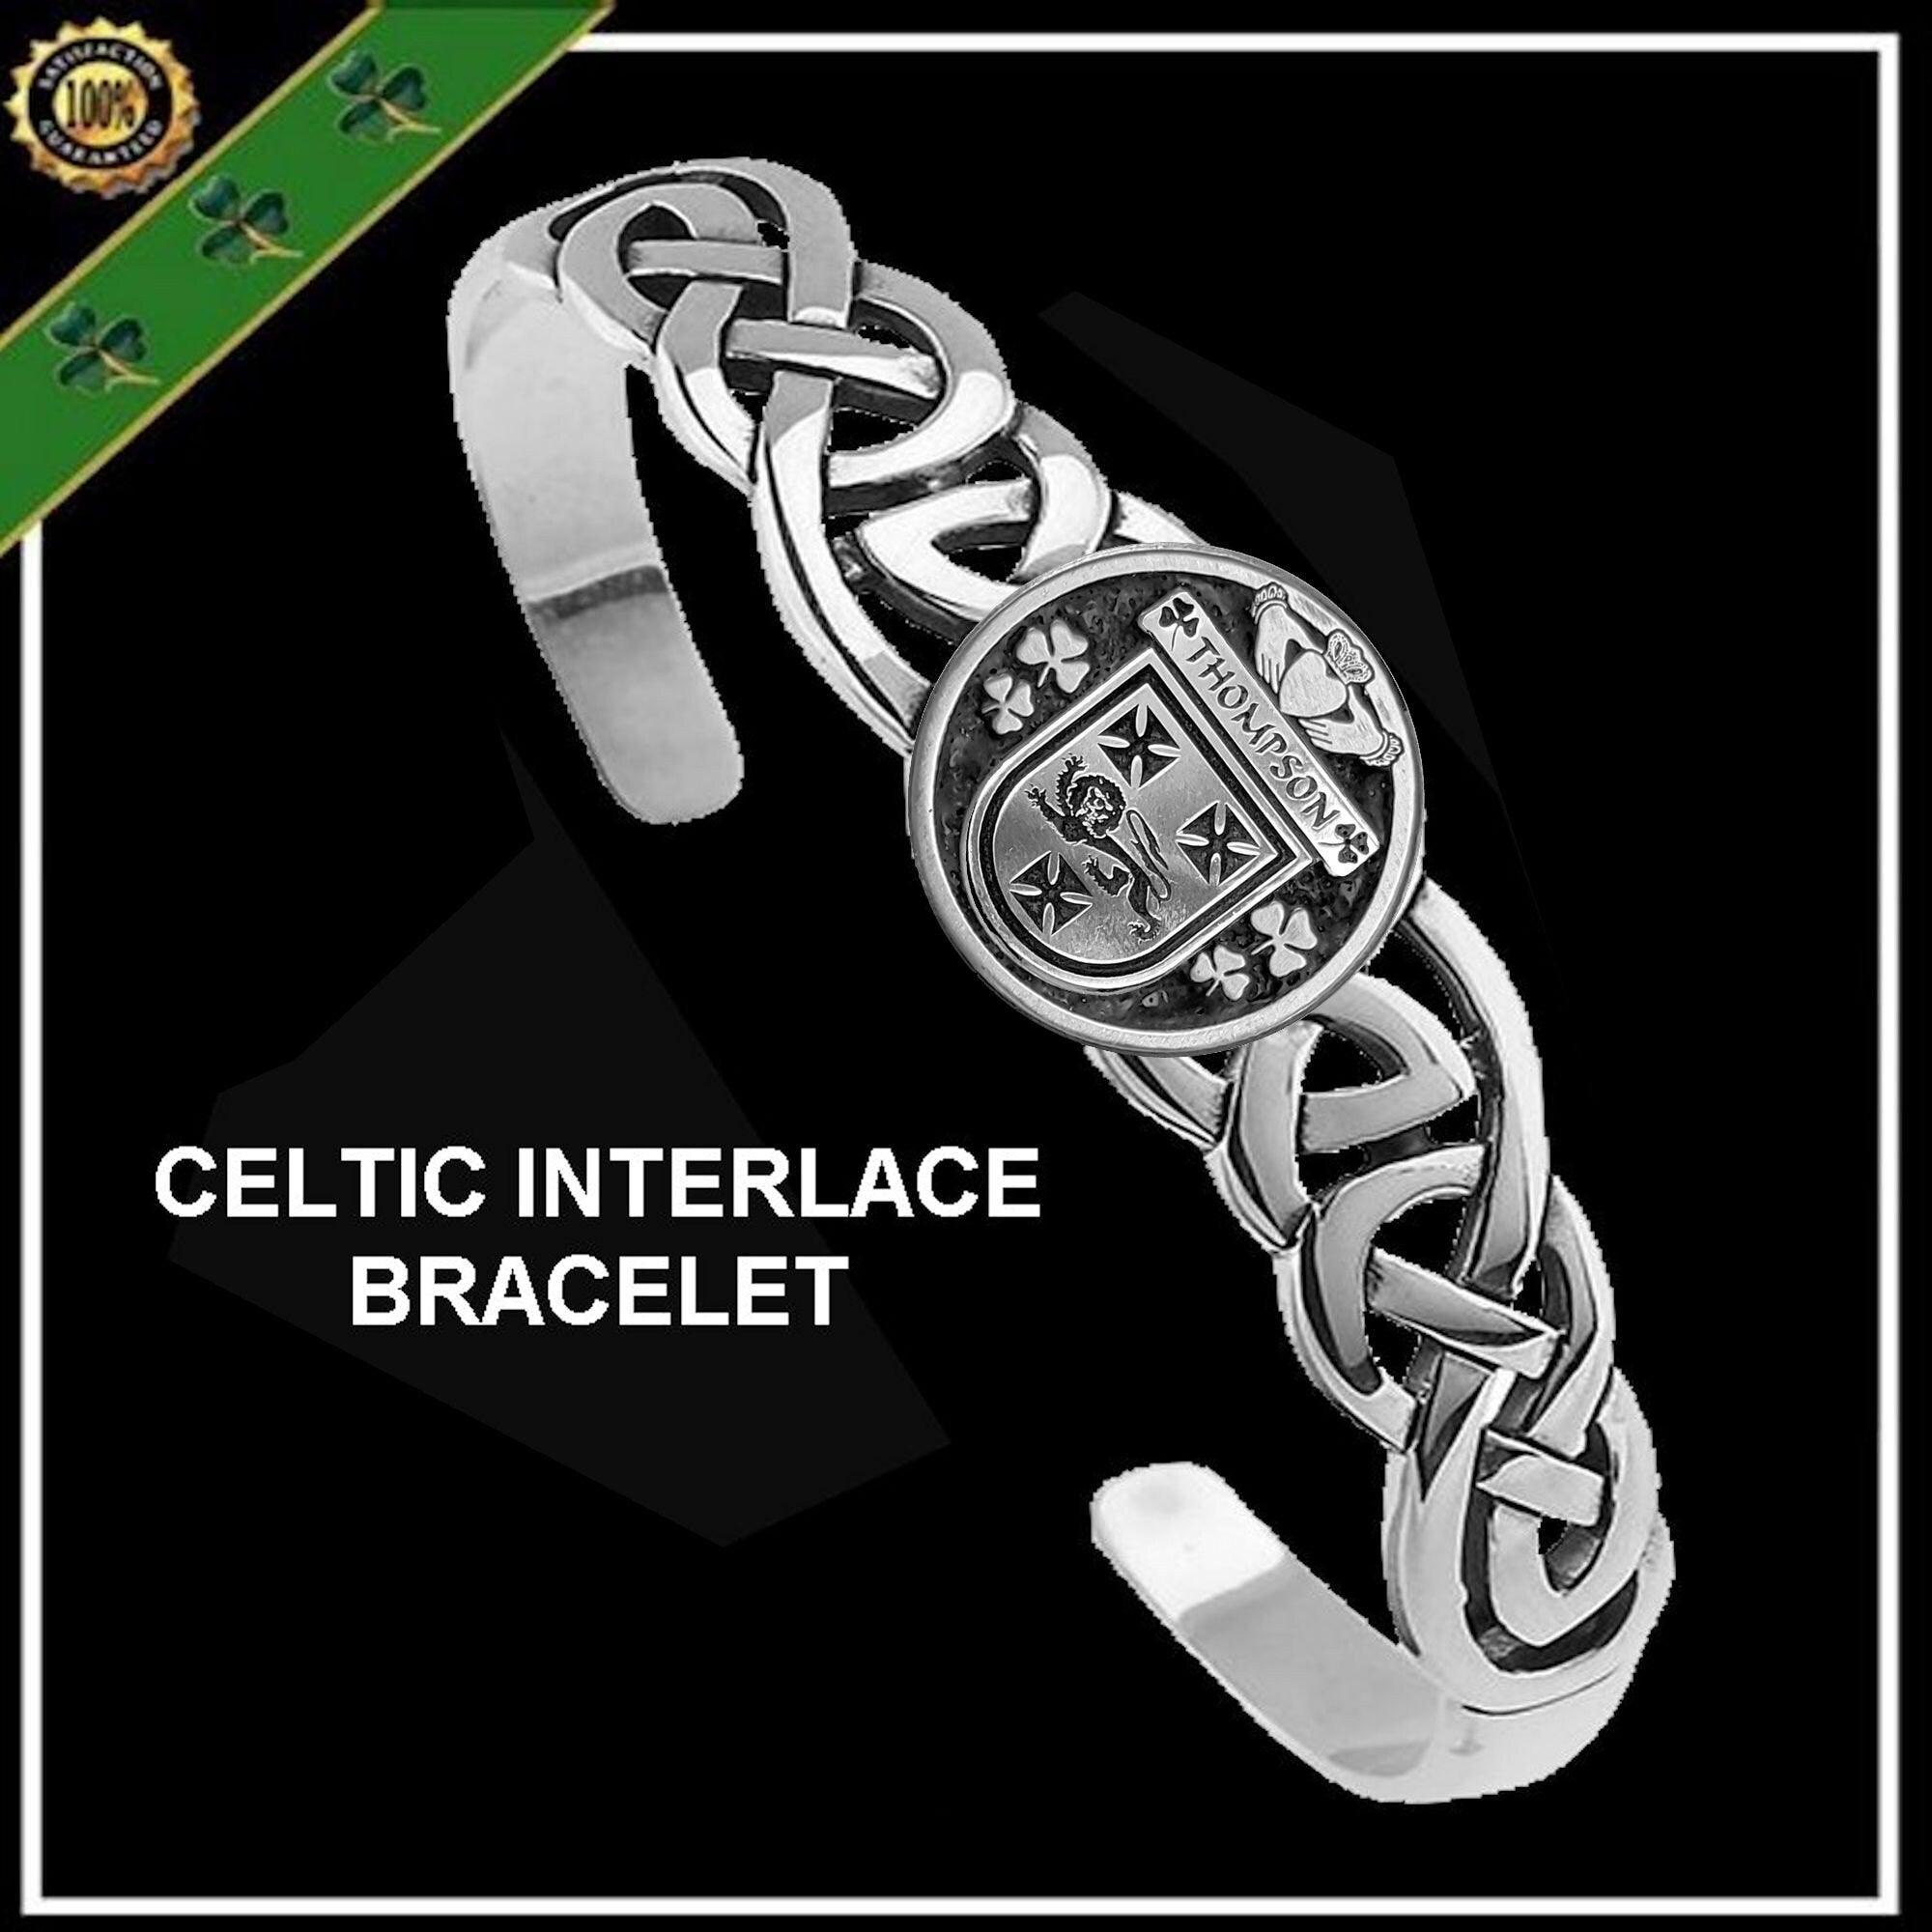 Thompson Irish Coat of Arms Disk Cuff Bracelet - Sterling Silver